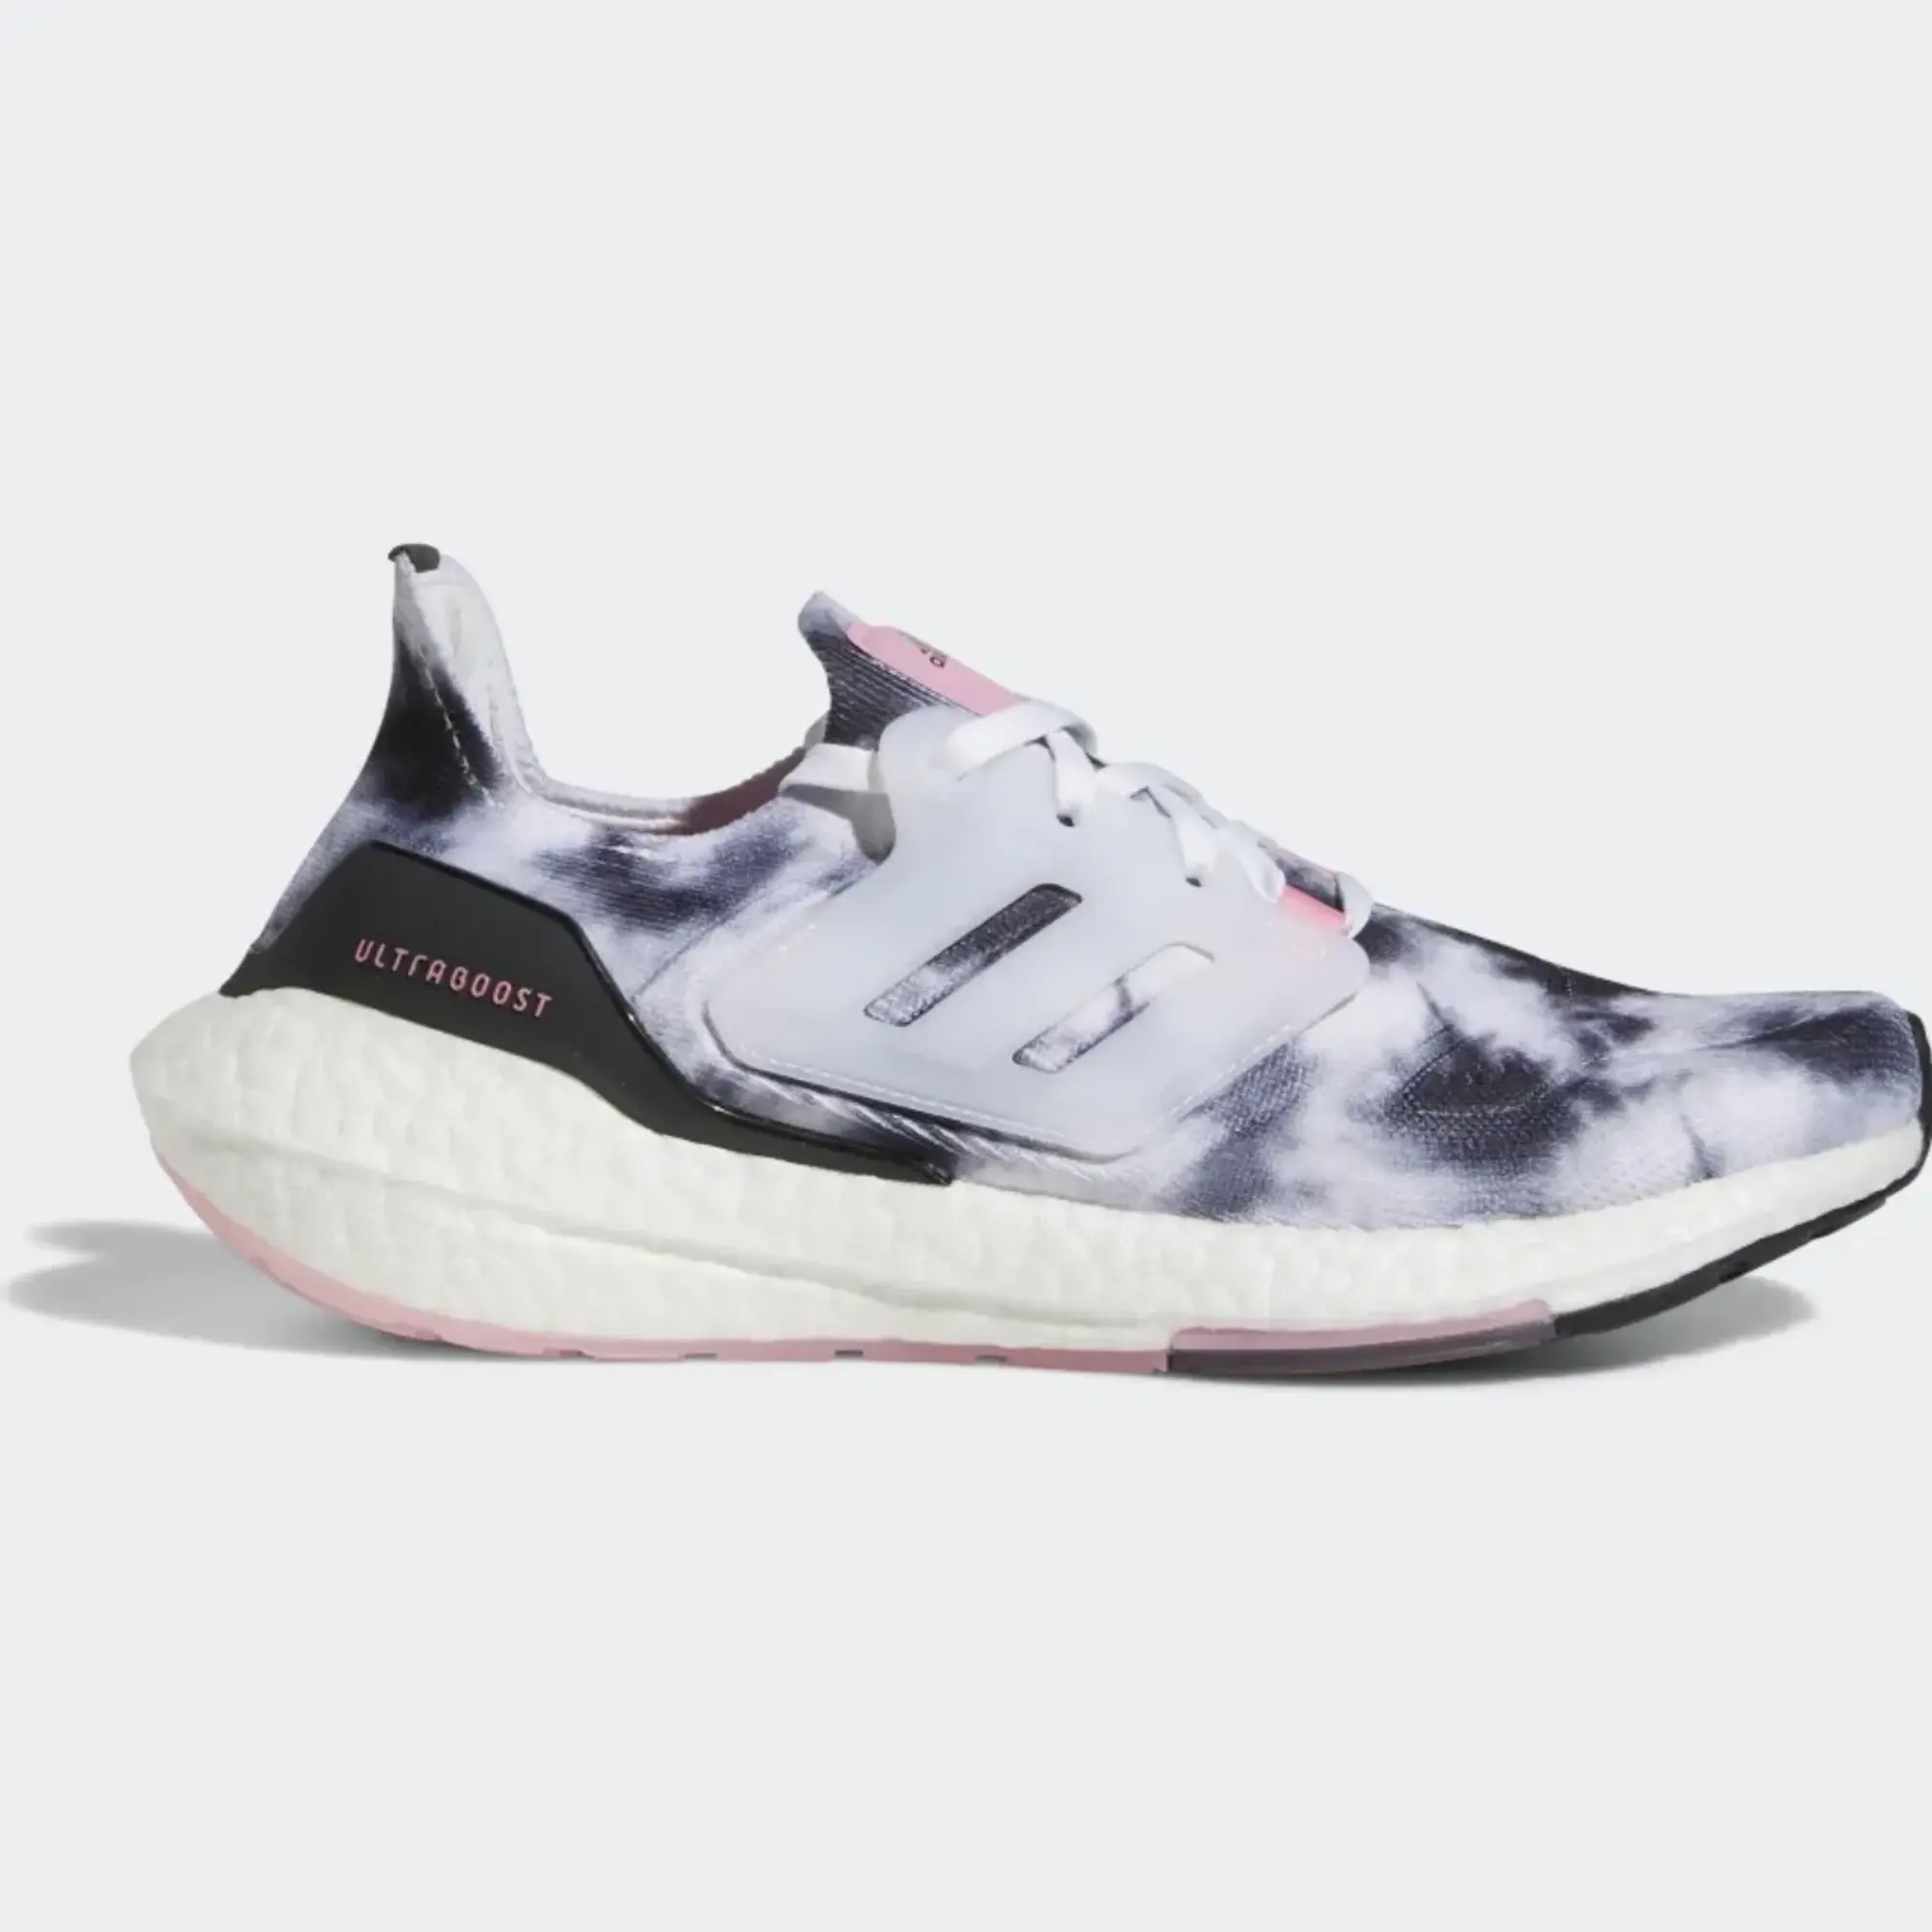 adidas Ultraboost 22 Shoes - White/Pink, White/Pink